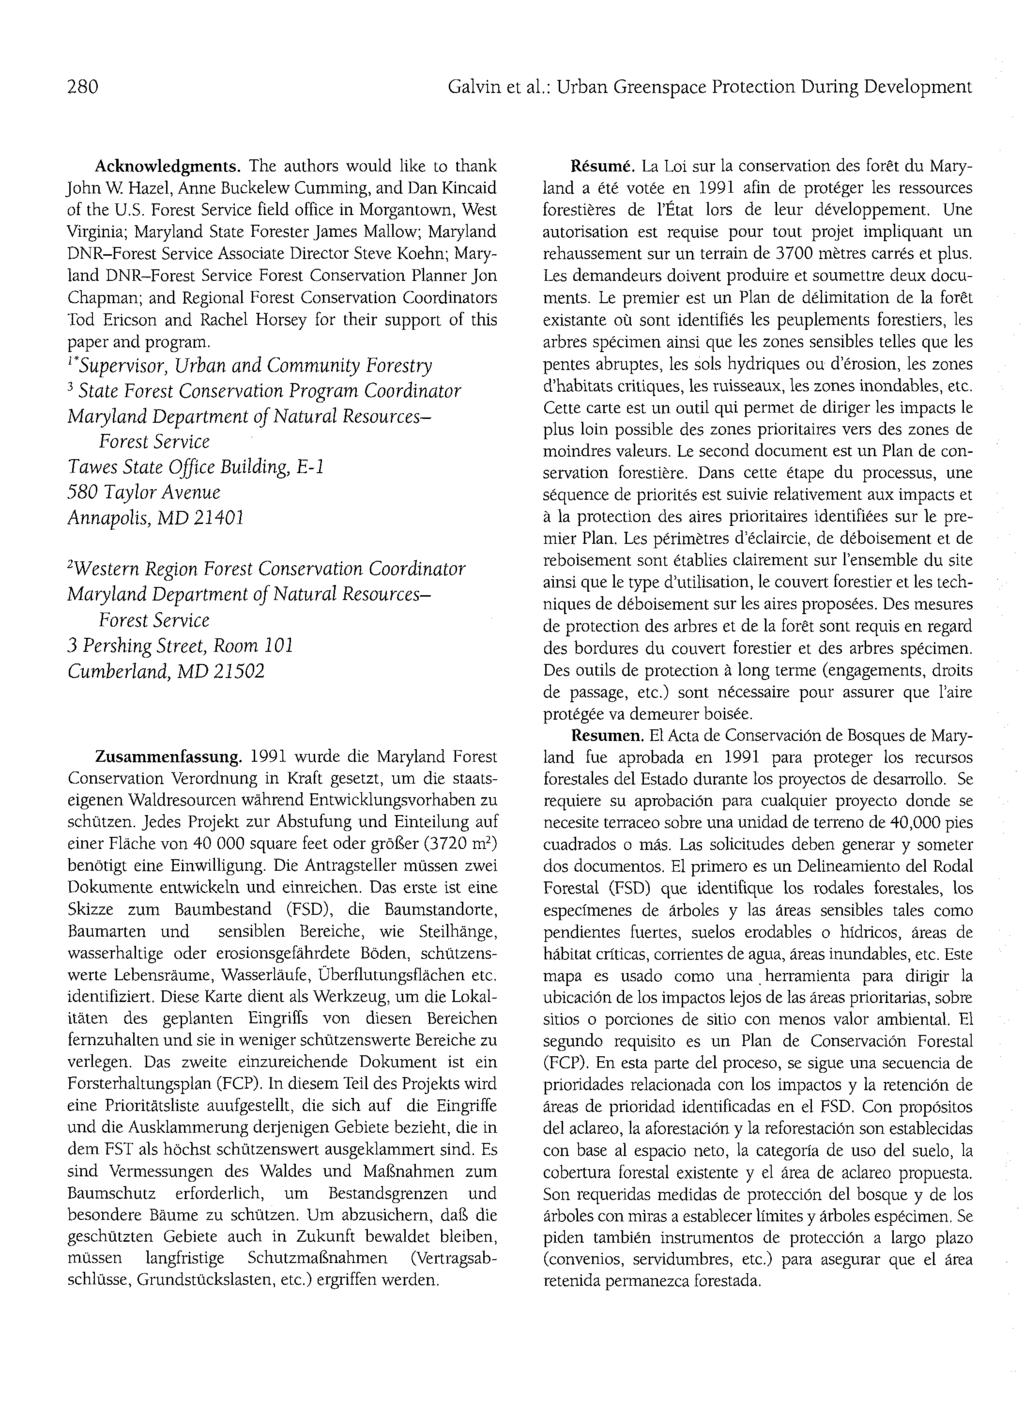 280 Galvin et al: Urban Greenspace Protection During Development Acknowledgments. The authors would like to thank John W Hazel, Anne Buckelew Cumming, and Dan Kincaid of the U.S.